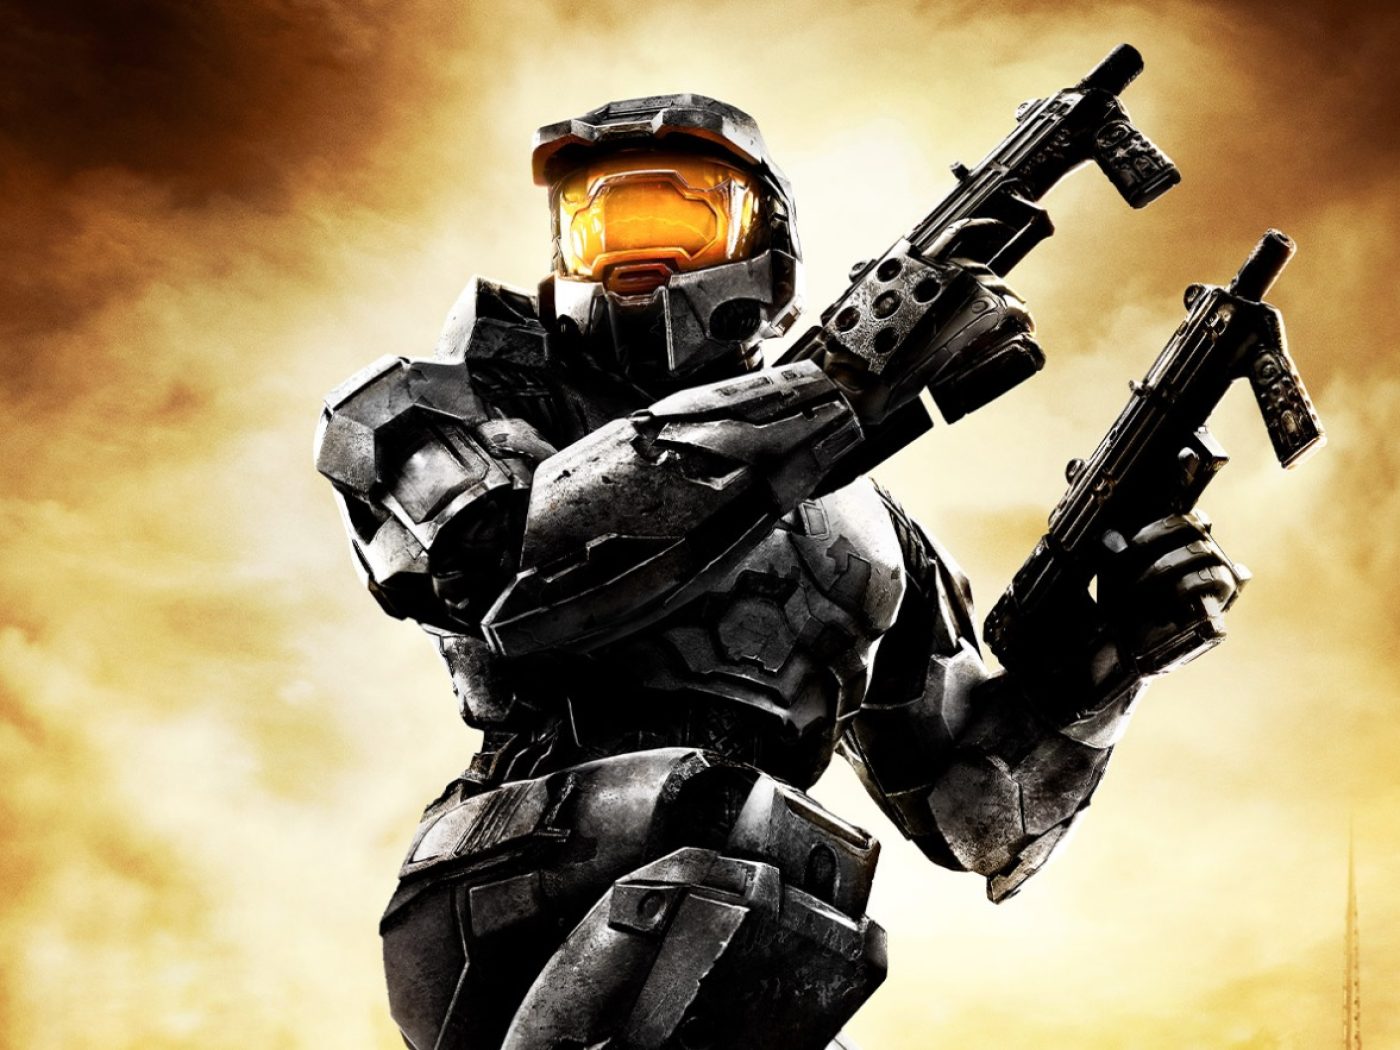 Halo 4 joins The Master Chief Collection fully remastered next week for PC,  halo serie 